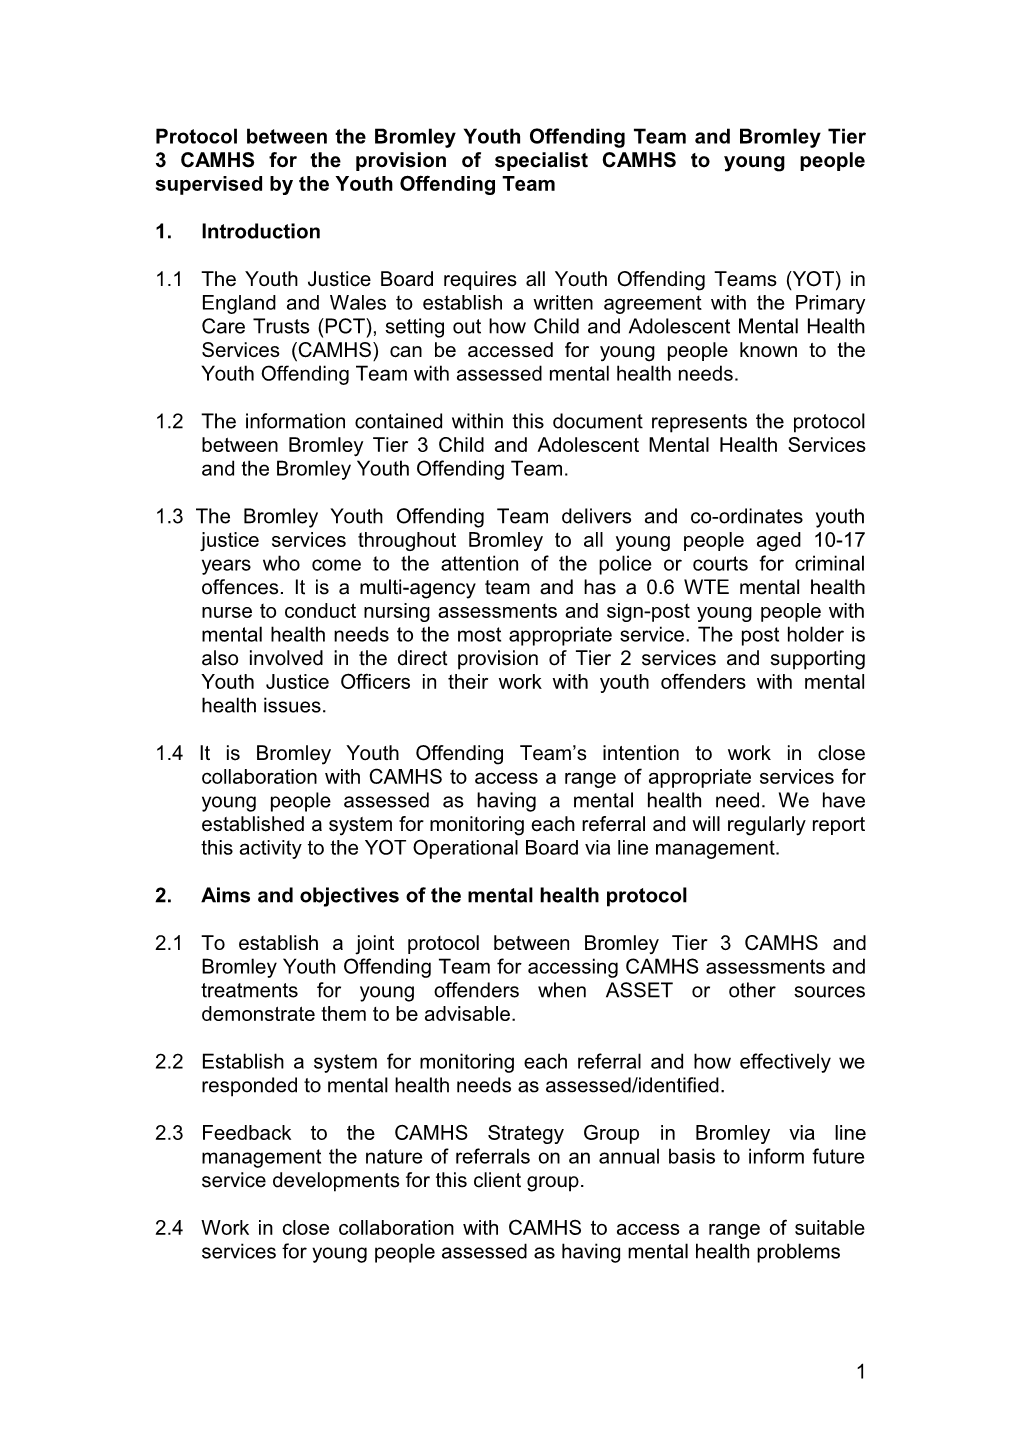 Protocol Between the Bromley Youth Offending Team and NHS Trusts for the Provision of Specialist